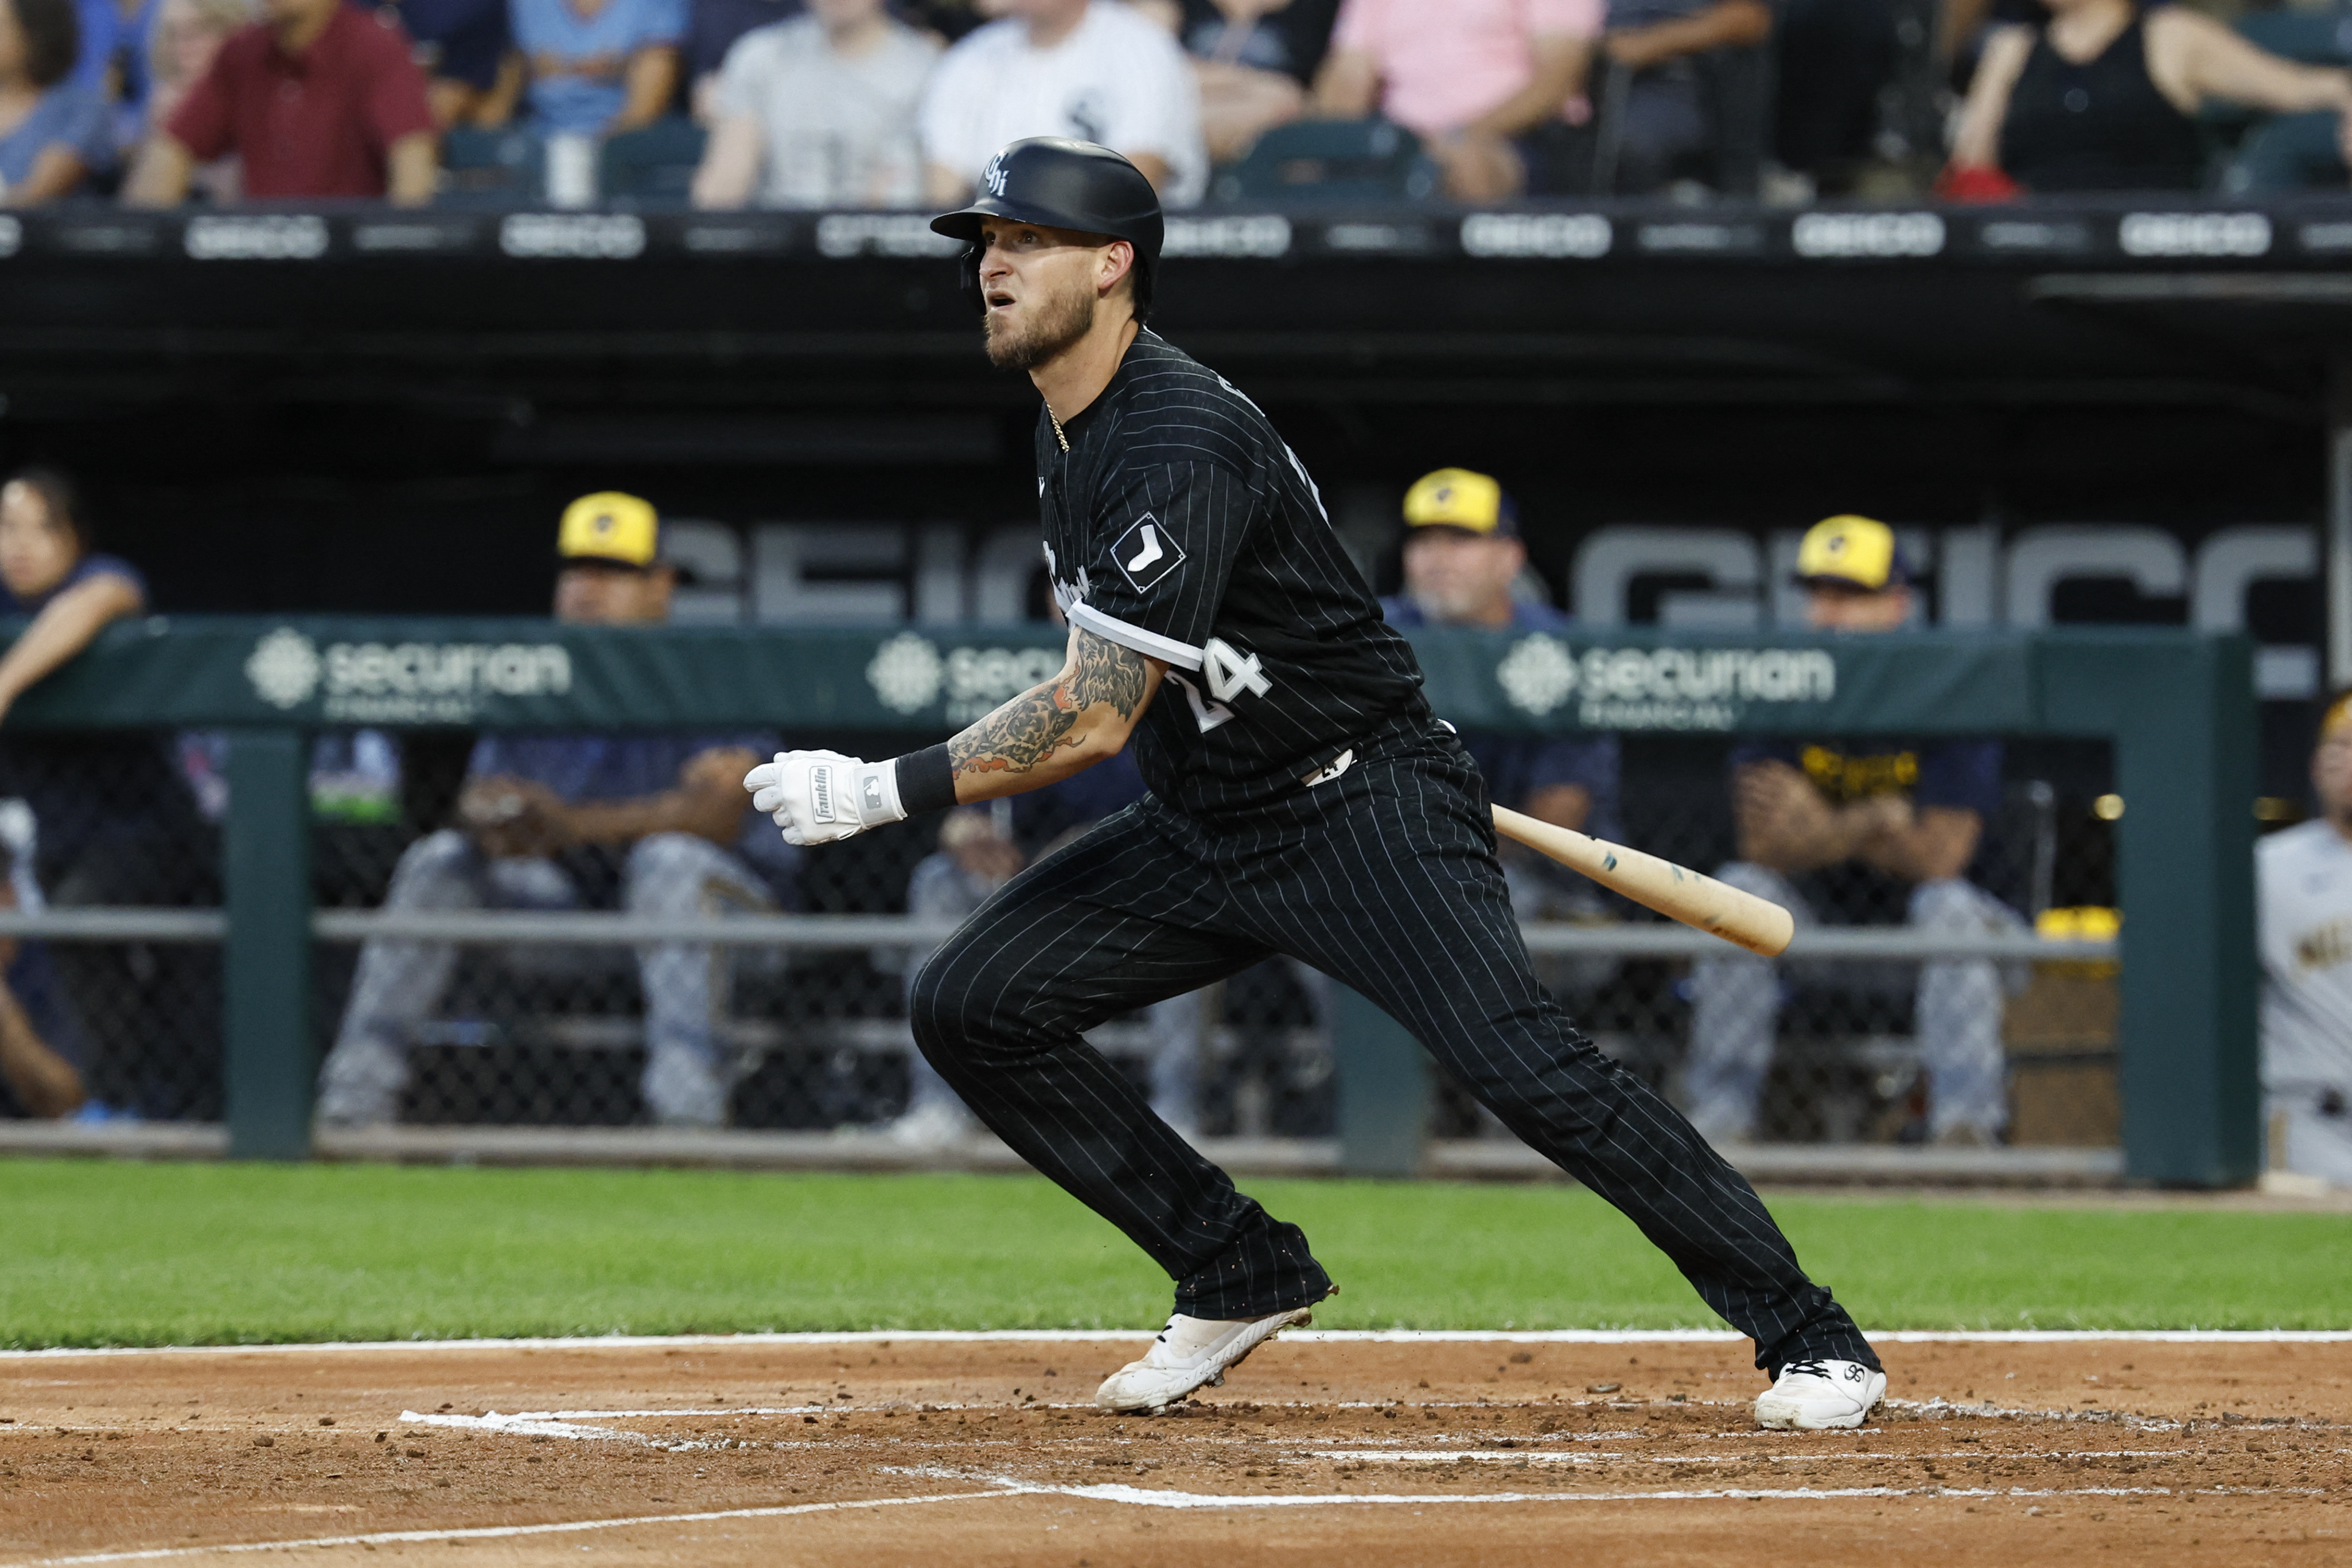 Canha double in 10th lifts Brewers over White Sox 7-6 as Milwaukee